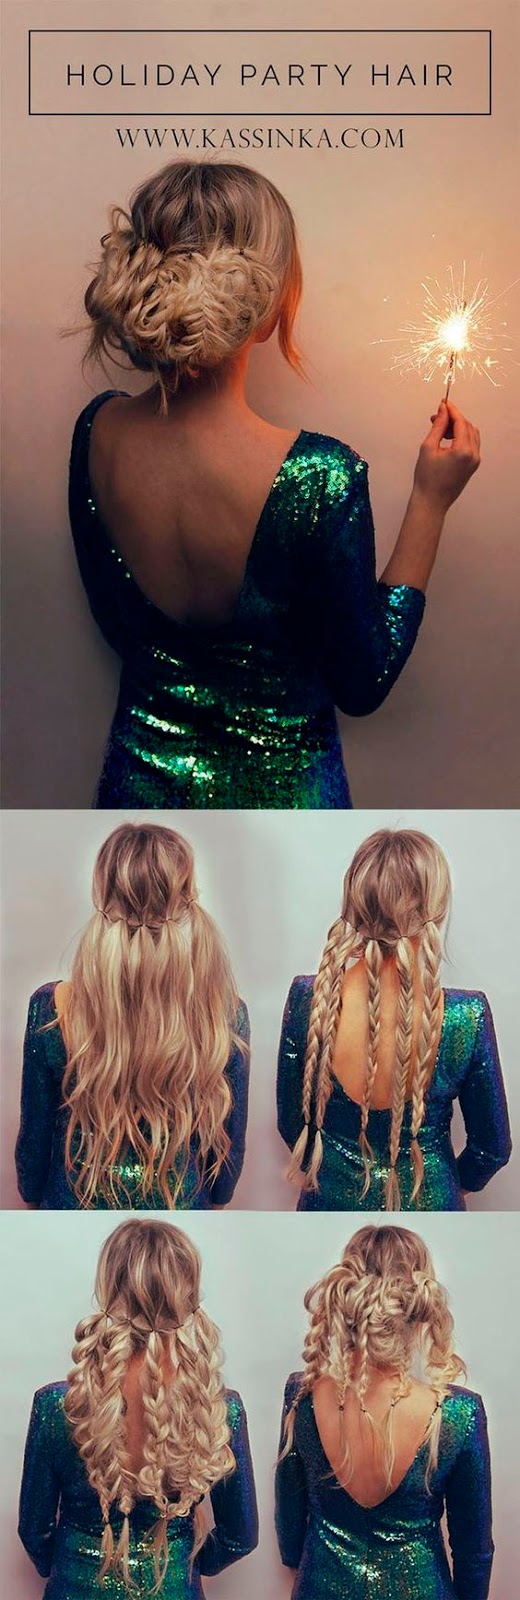 CHRISTMAS PARTY HAIRSTYLES IDEAS